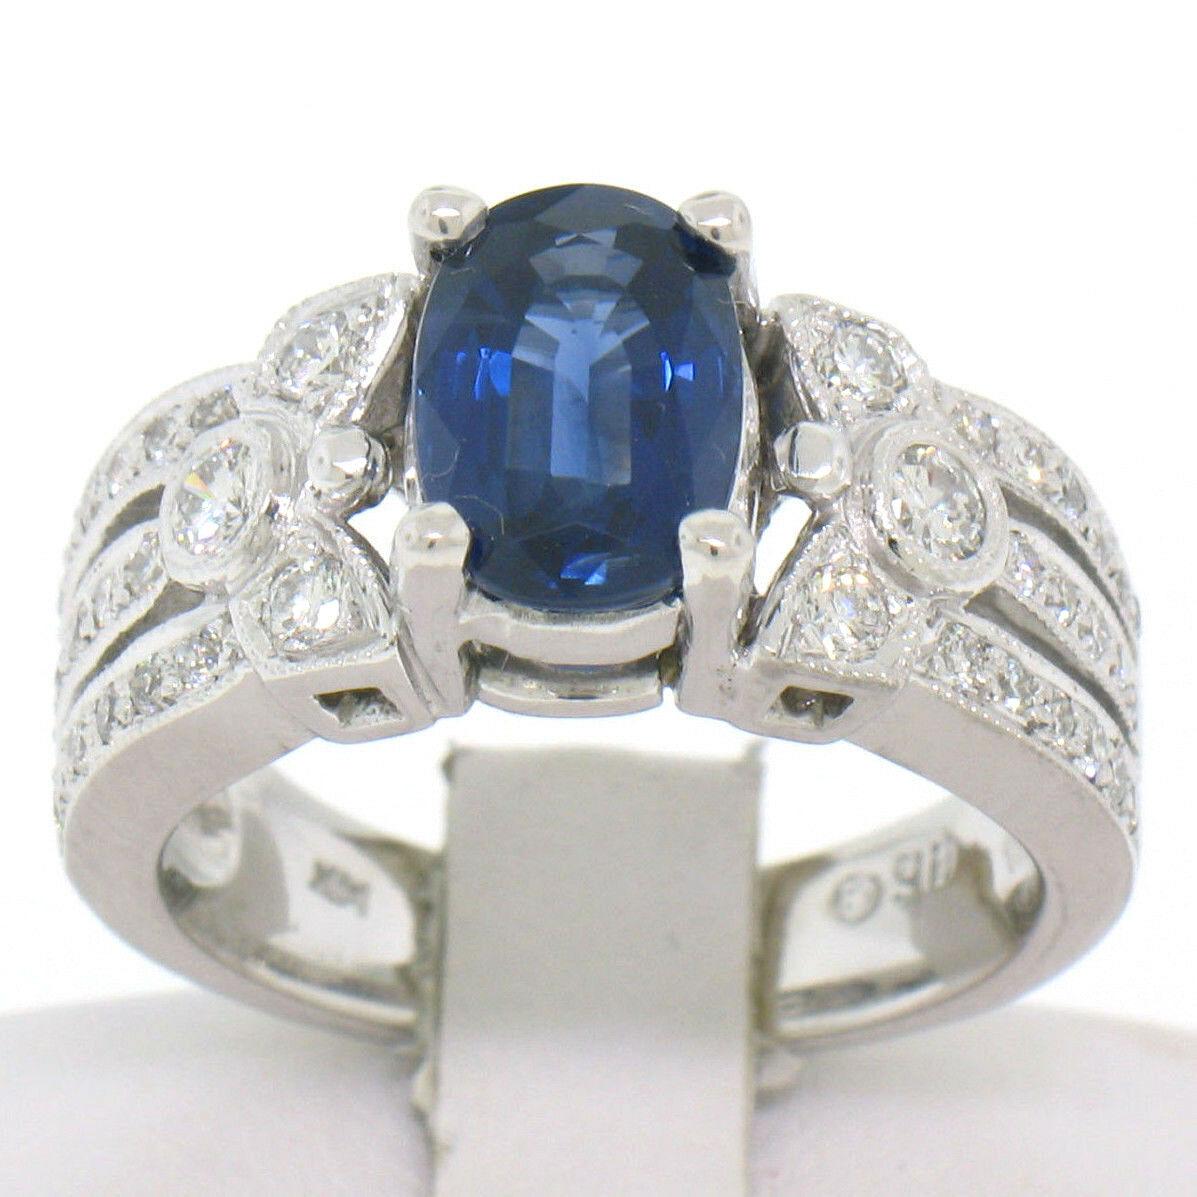 Oval Cut 14k White Gold EGL 2.18ct Oval Royal Blue Sapphire & Diamond Engagement Ring